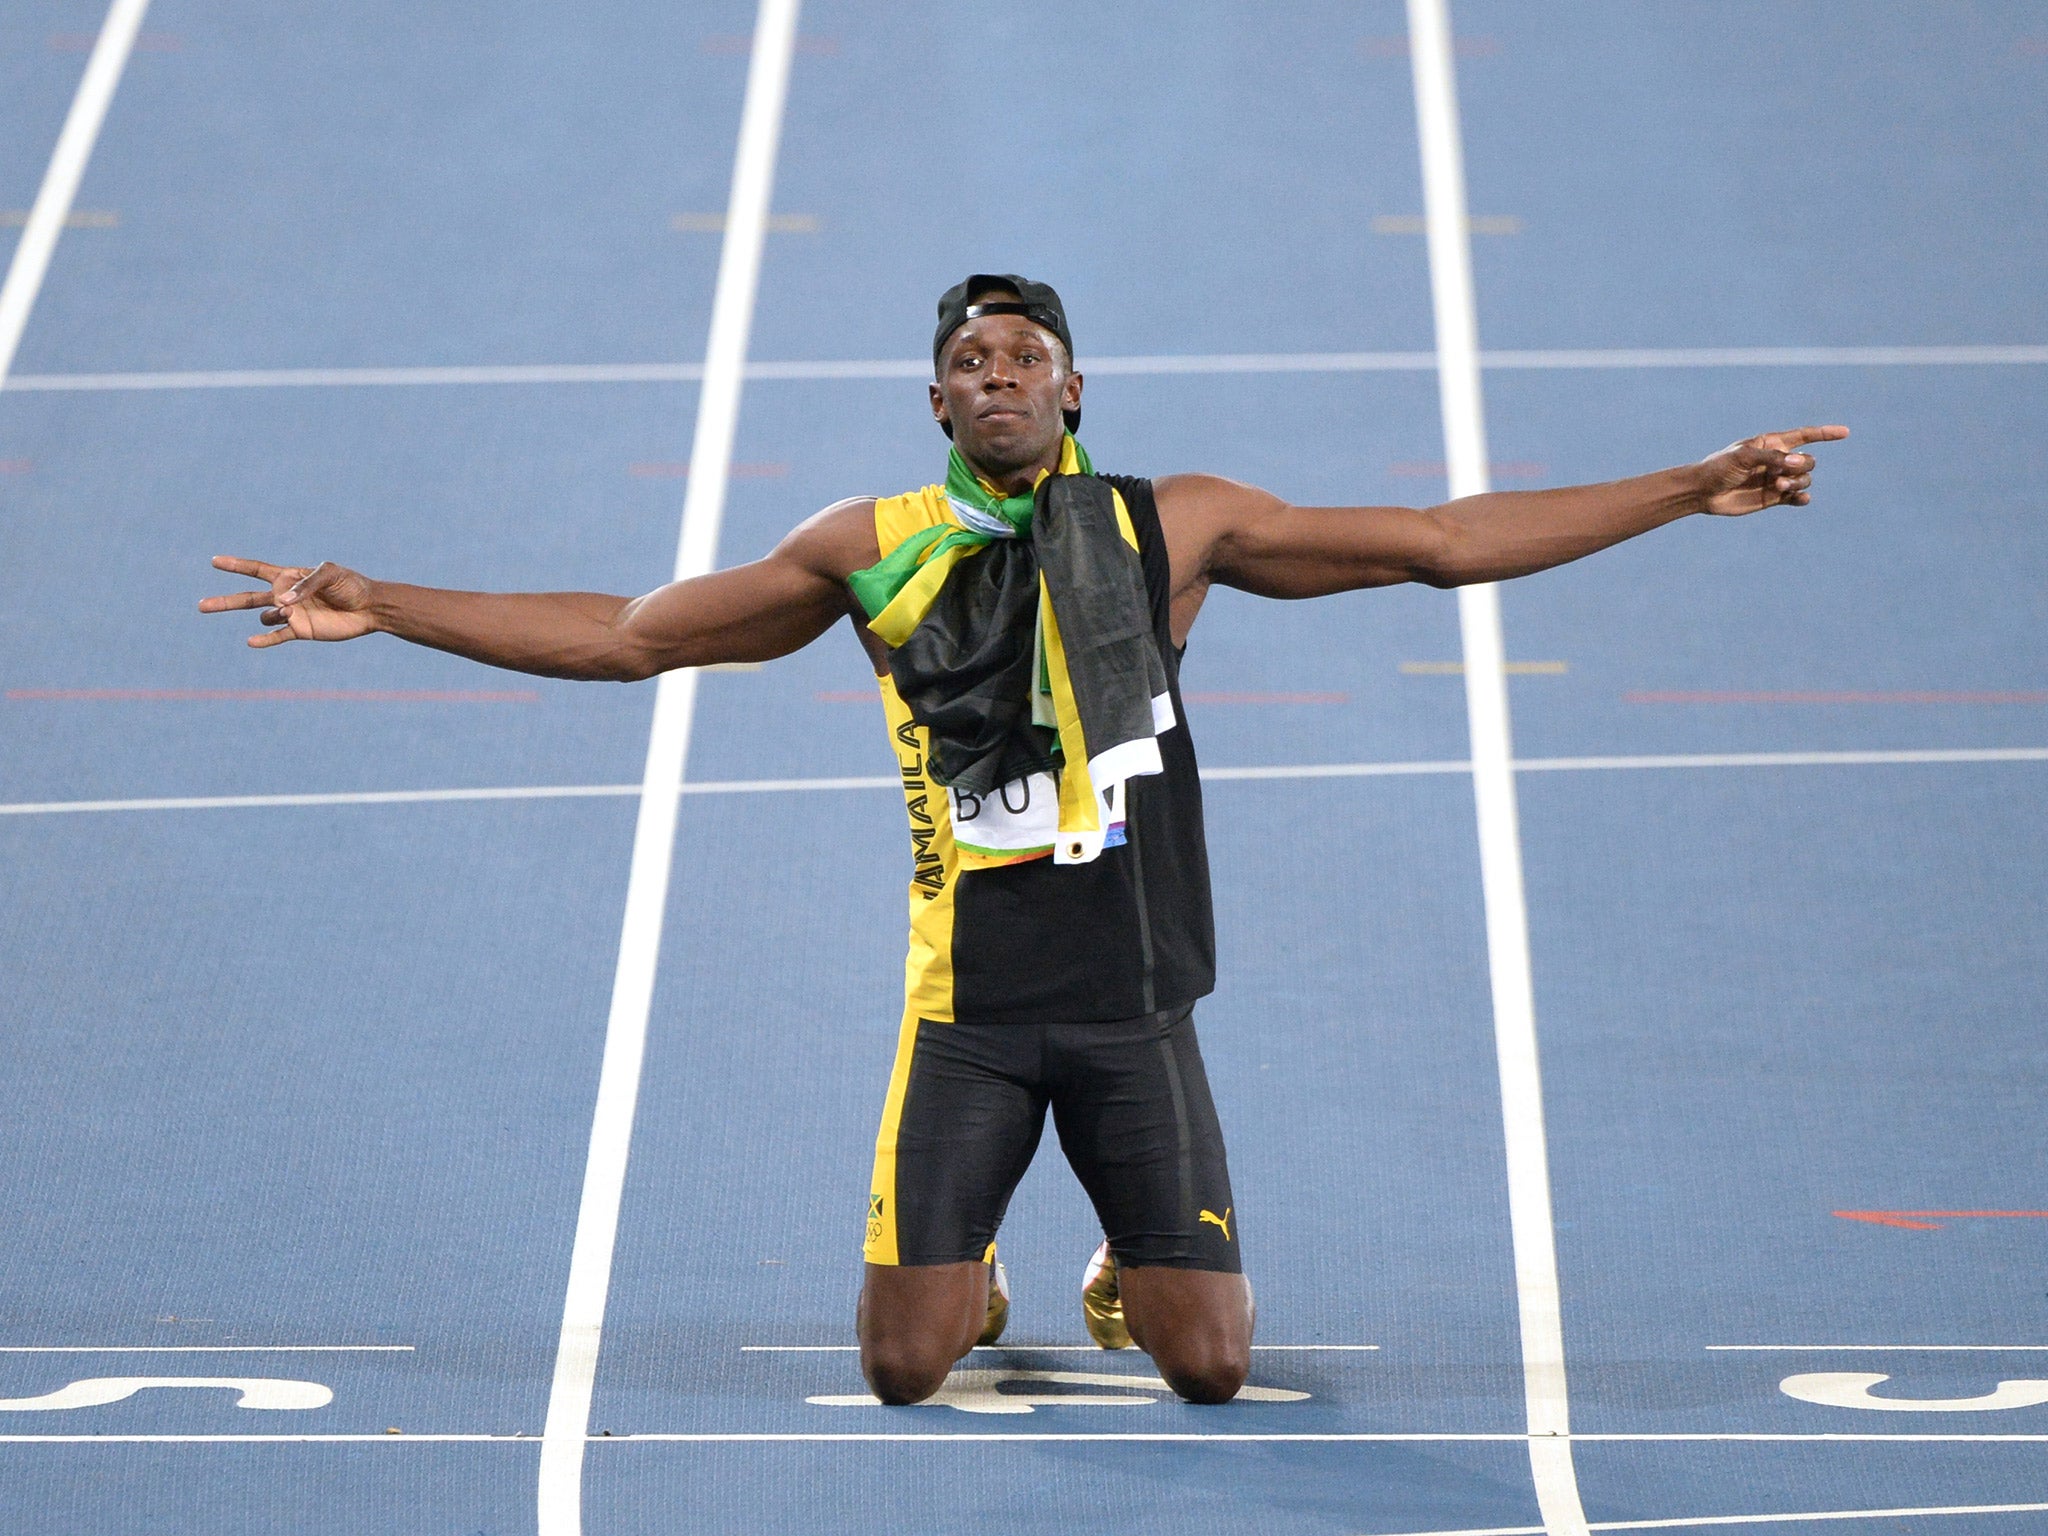 Jamaican sprinter Usain Bolt is difficult to outdo – even in print